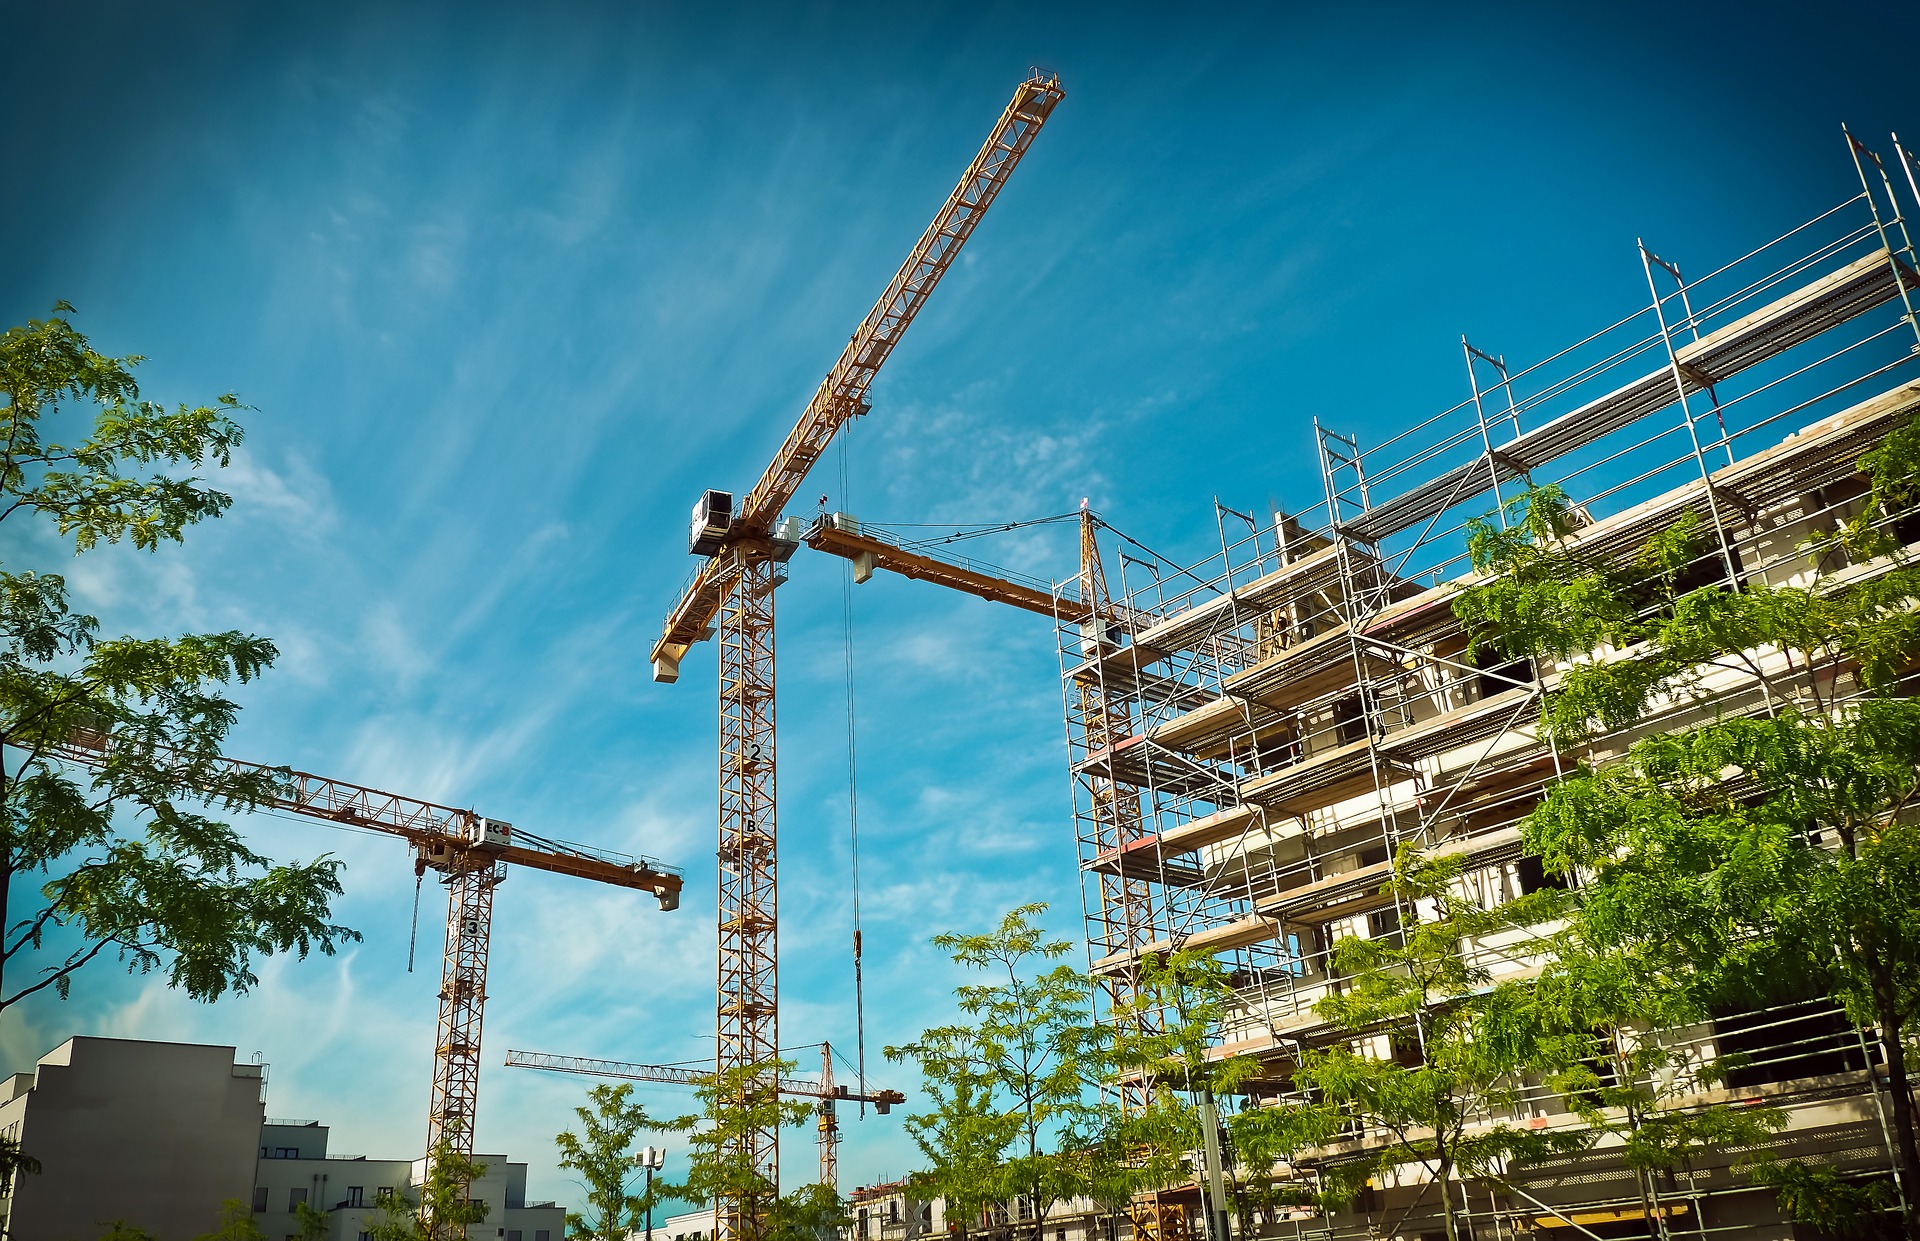 Top five multi-family housing construction projects that commenced in Germany in Q3 2021